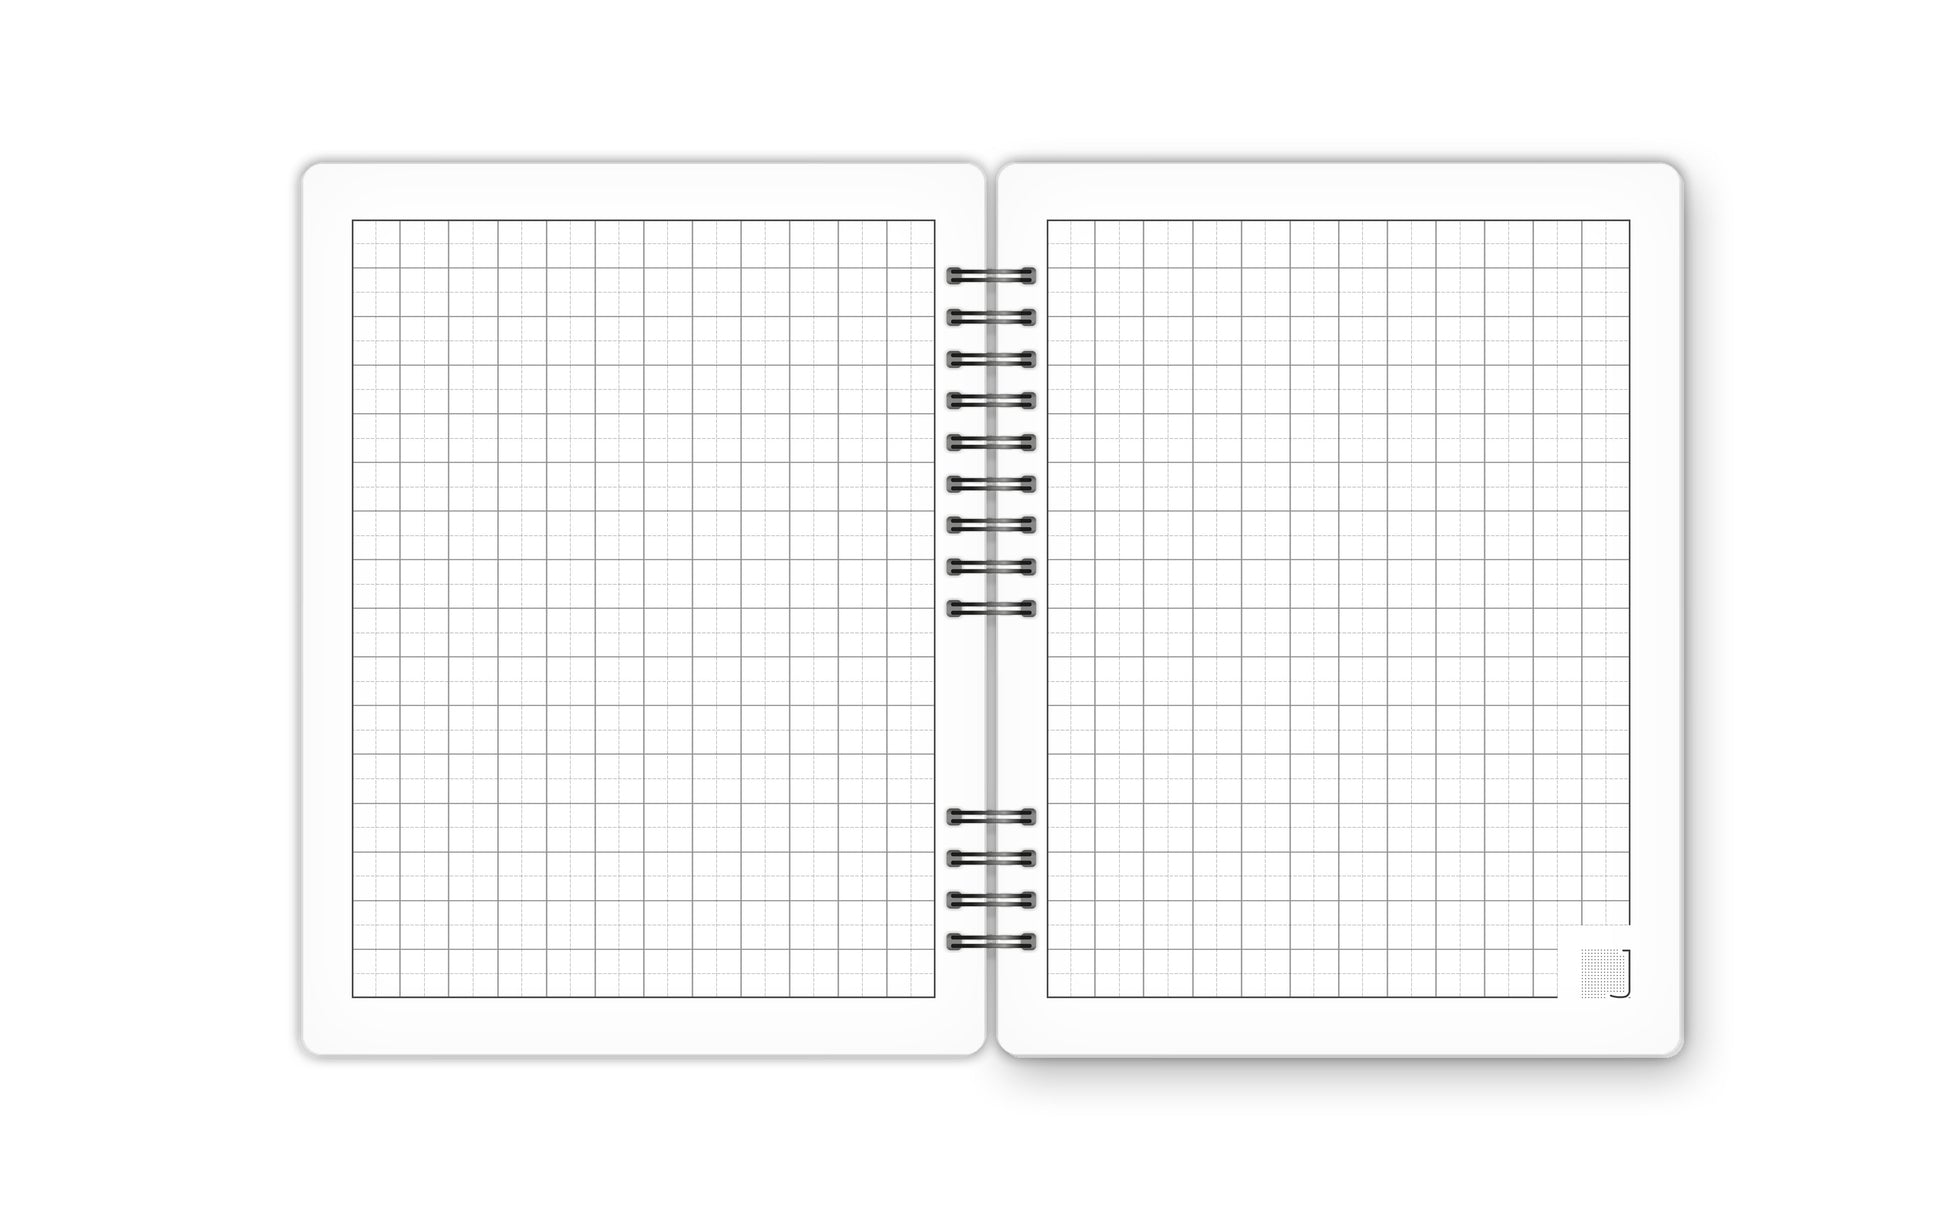 Square Grid - 18X14 cm - 75 Sheets | Teal - from Journals